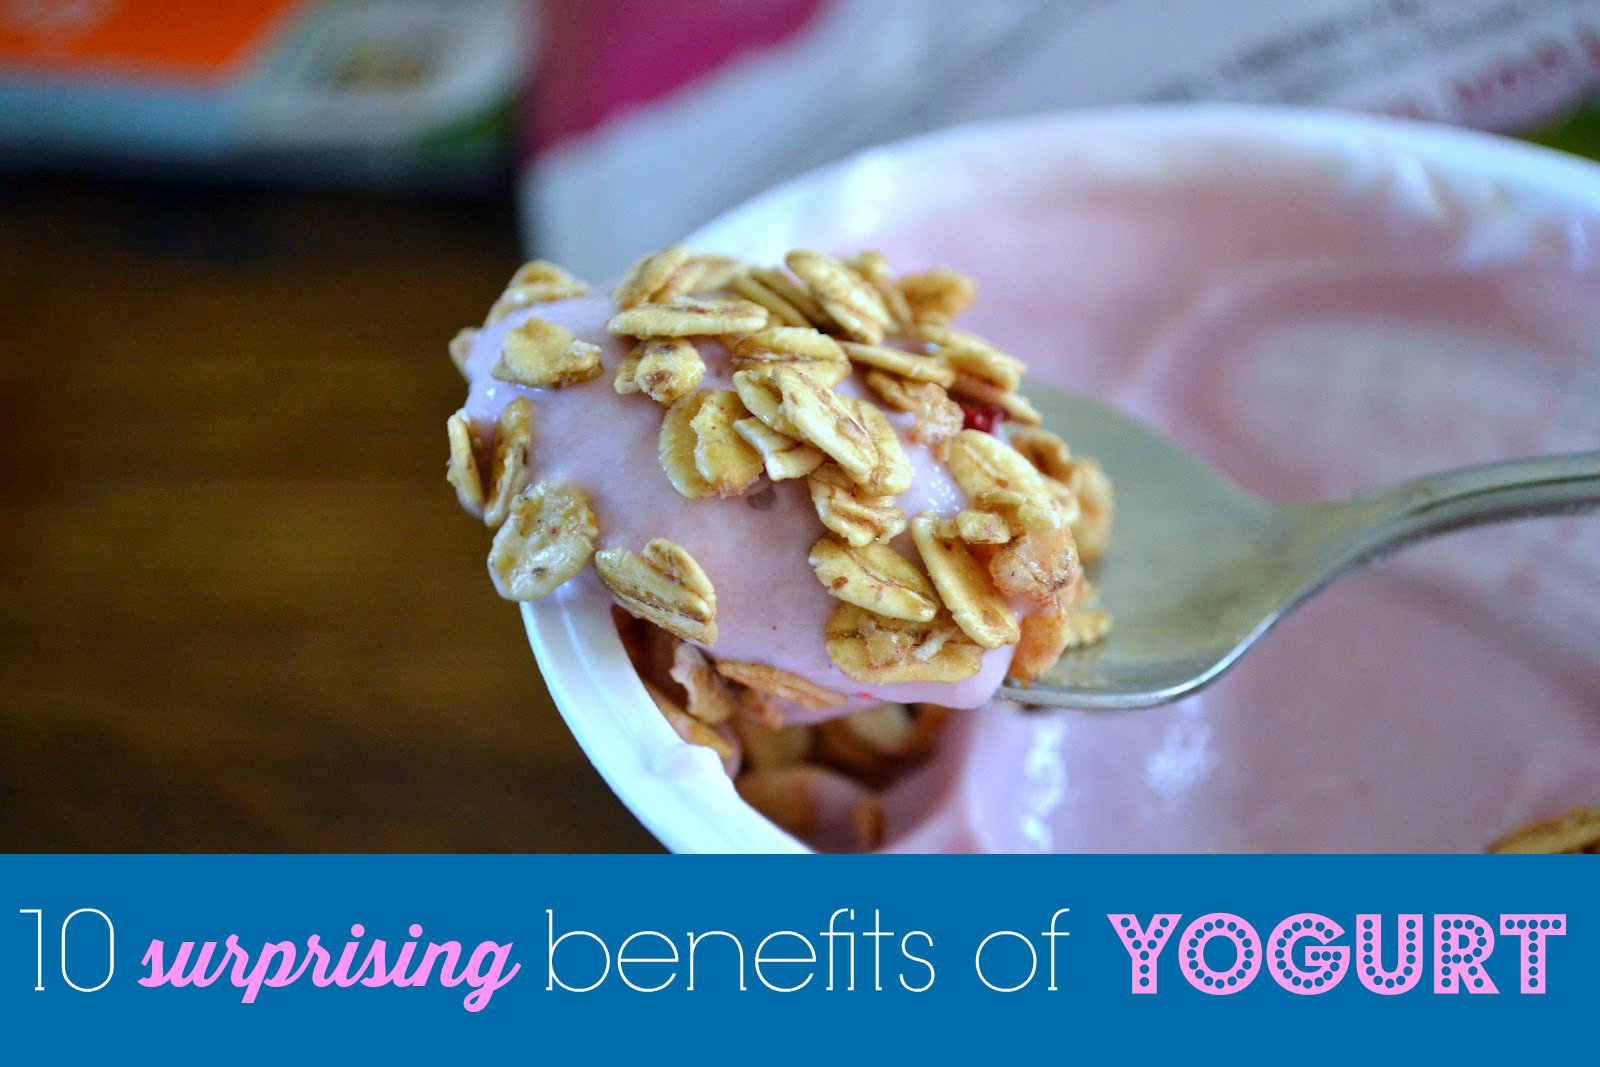 10 Surprising Benefits of Yogurt You’d Want To Know